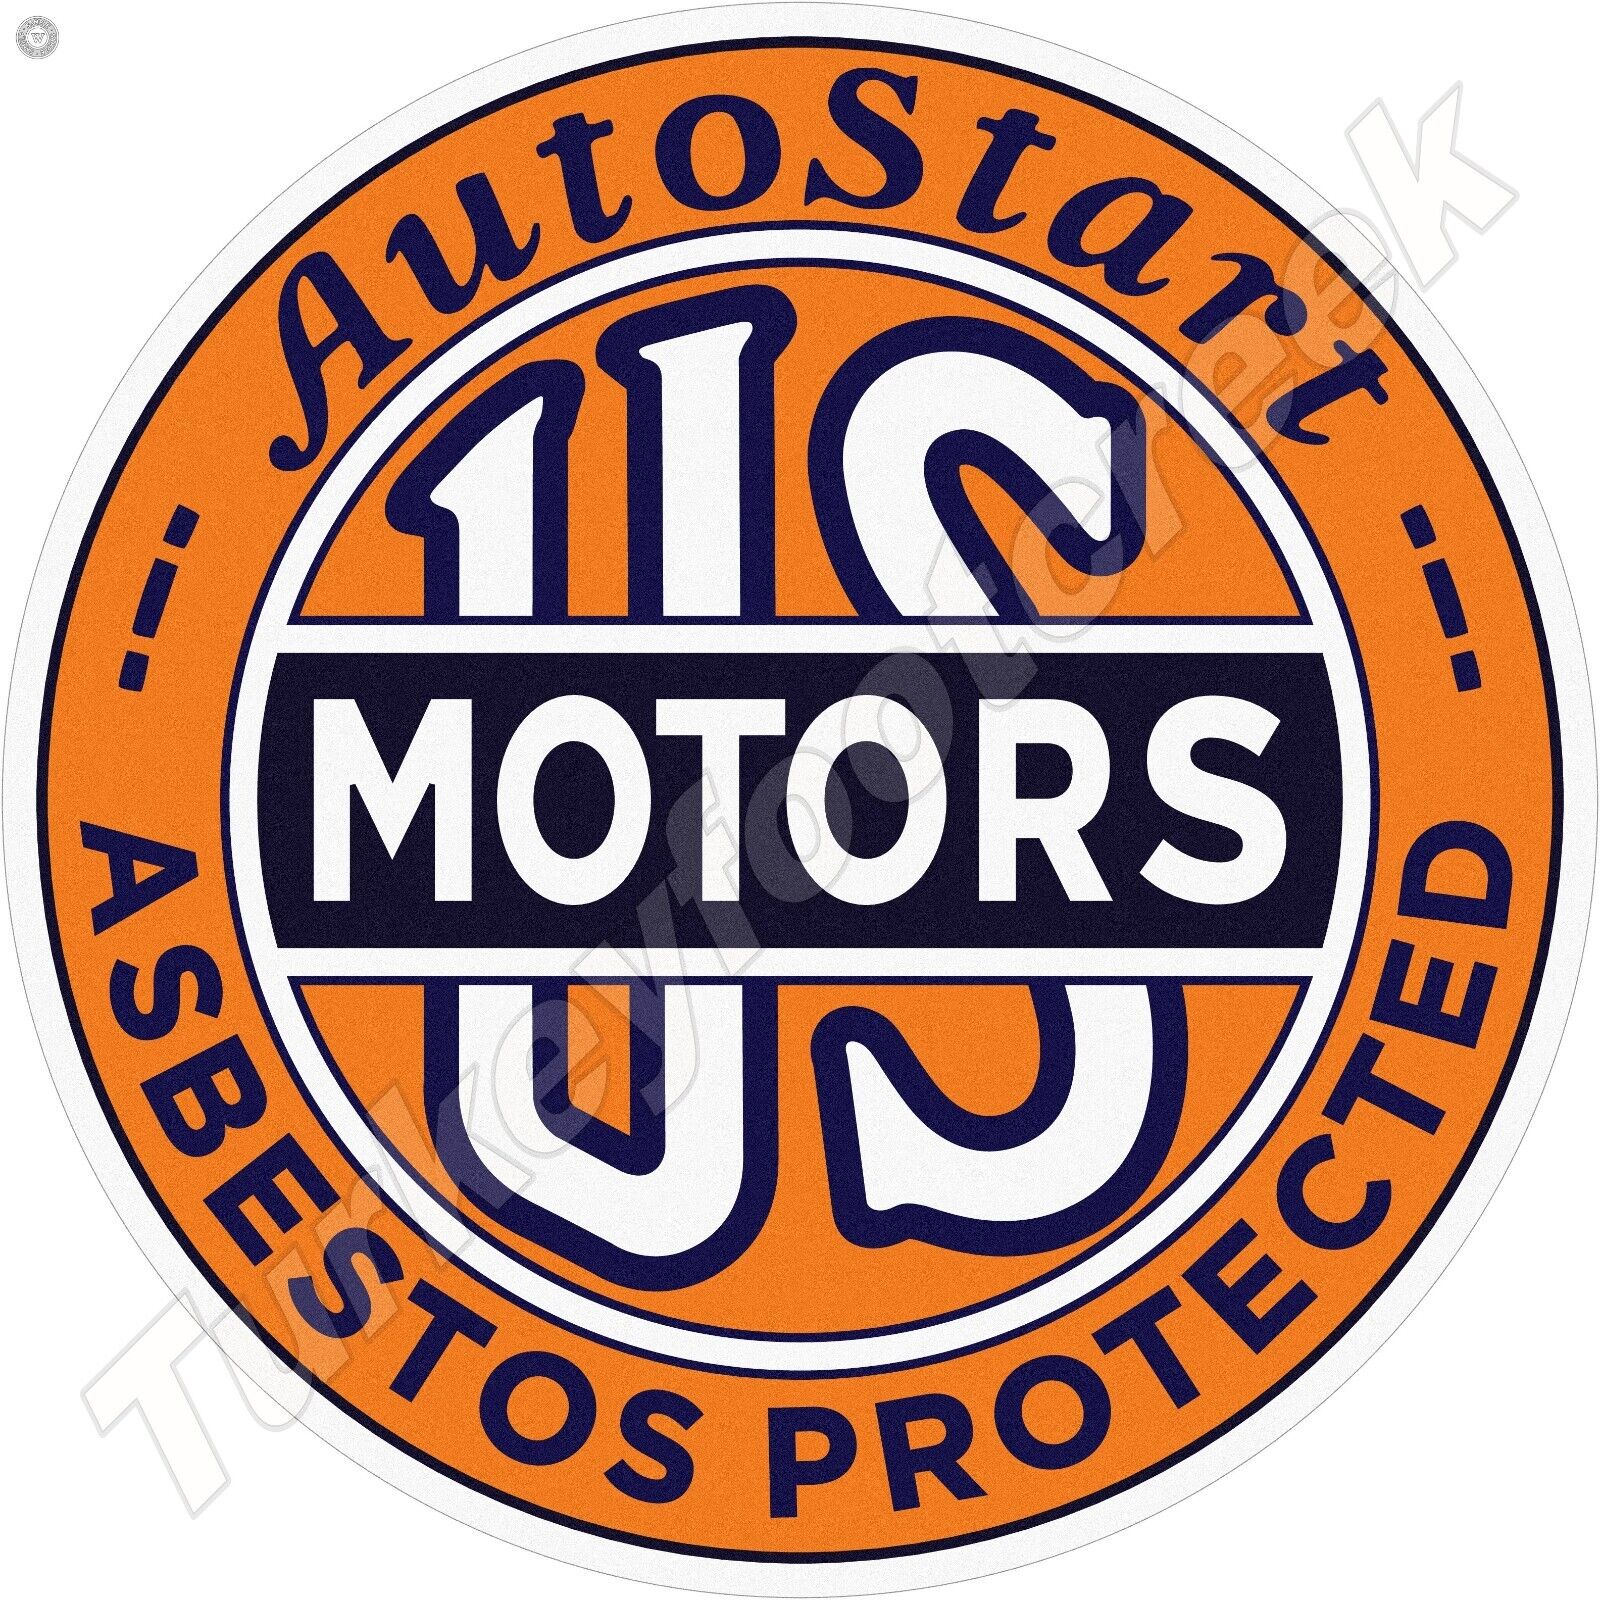 US Motors Auto Start Asbestos Protected  Round Metal Sign 2 Sizes To Choose From